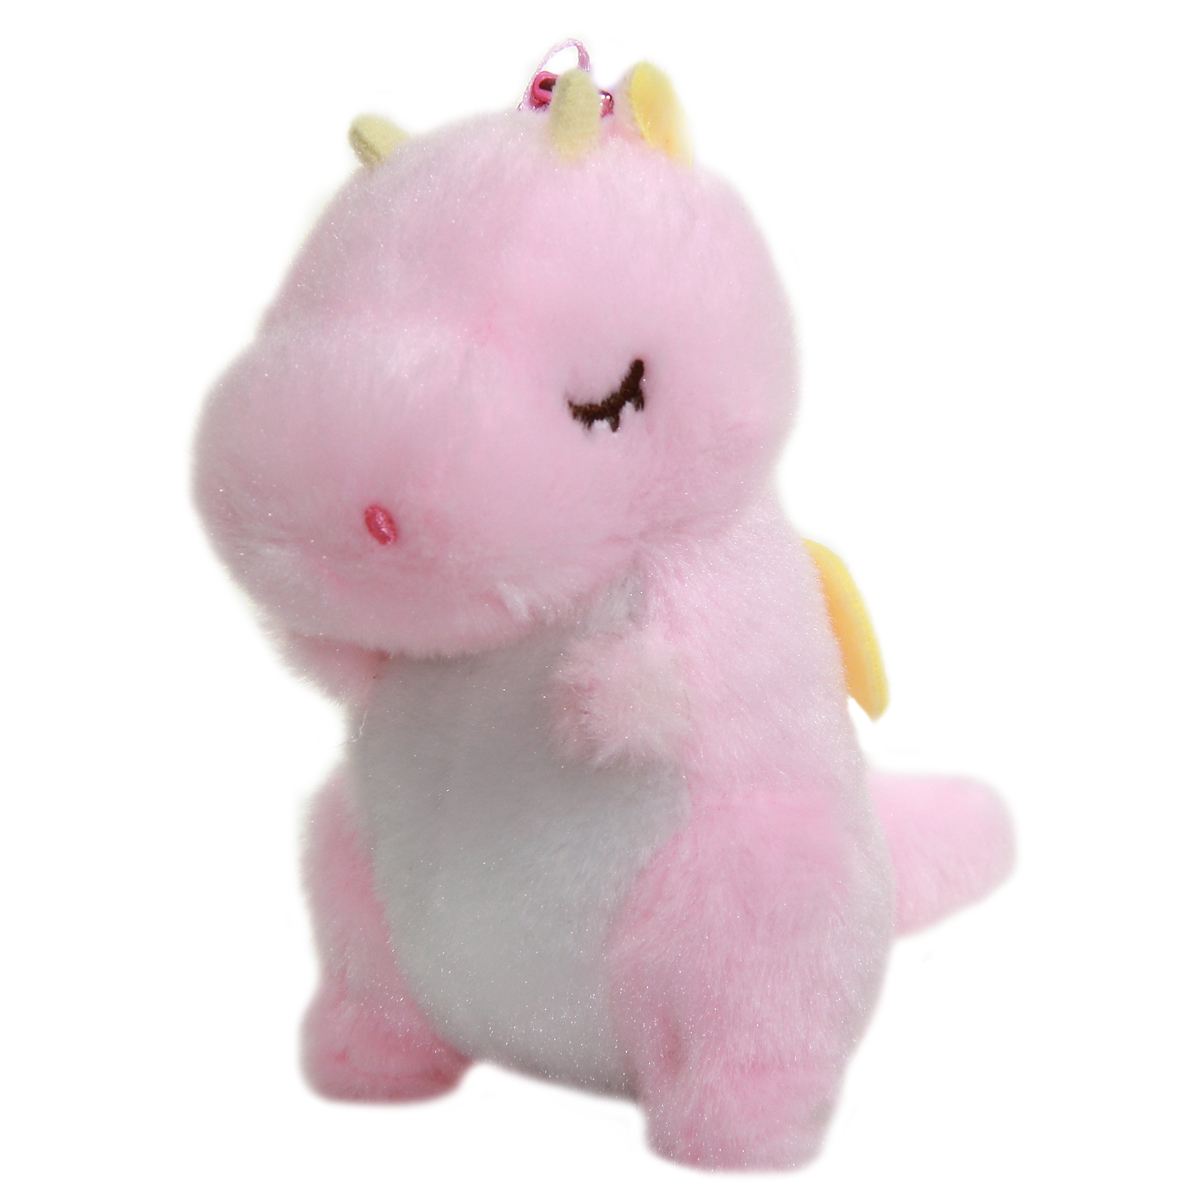 Fantasy Dragon Plushie Soft Stuffed Animal Toy Keychain Pink Small Size 4 Inches